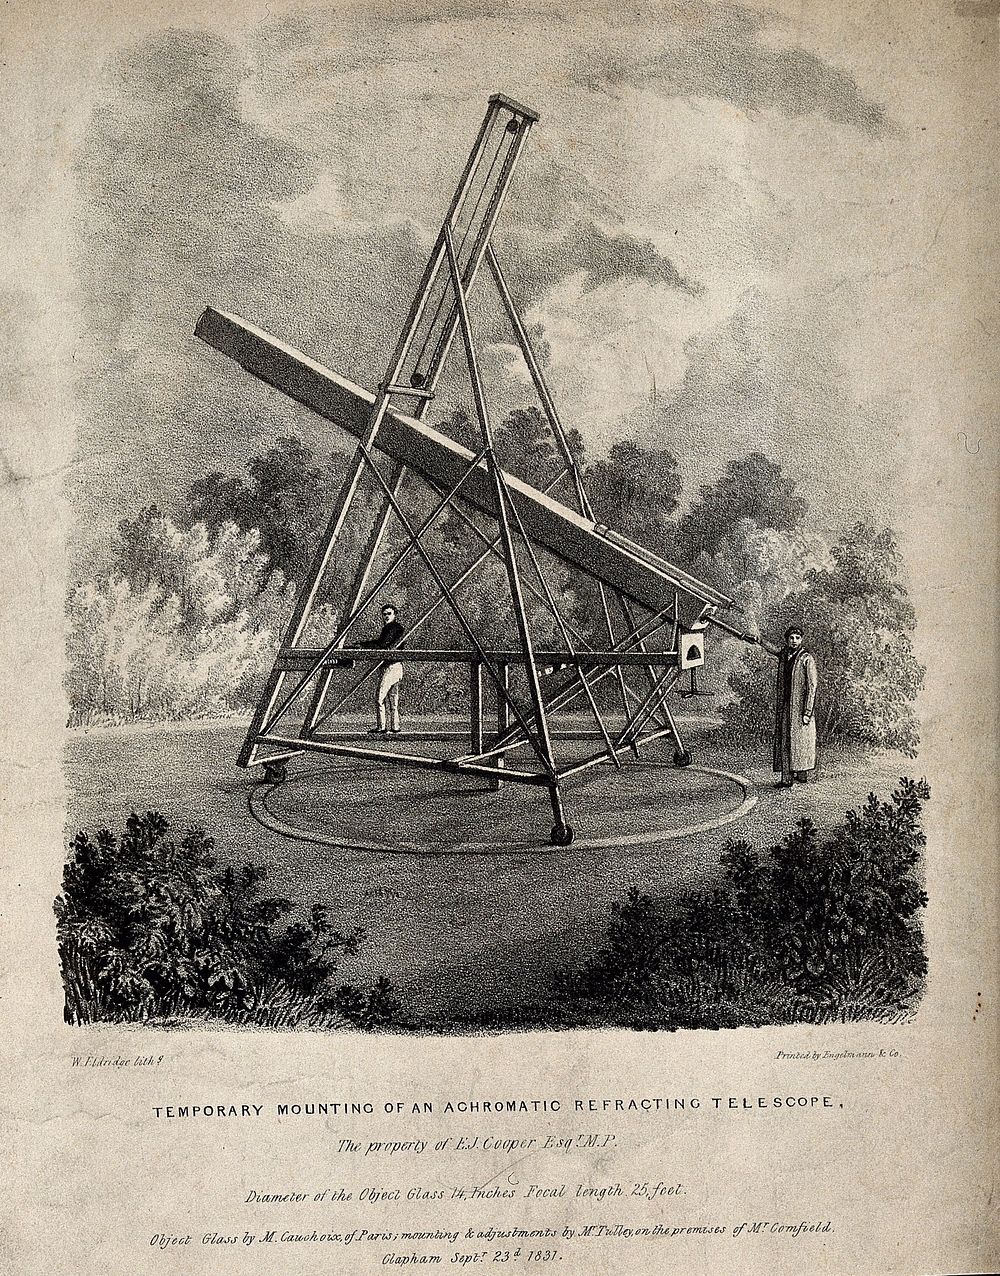 Astronomy: a large refracting telescope, in use outdoors. Lithograph by W. Eldridge, 183-.